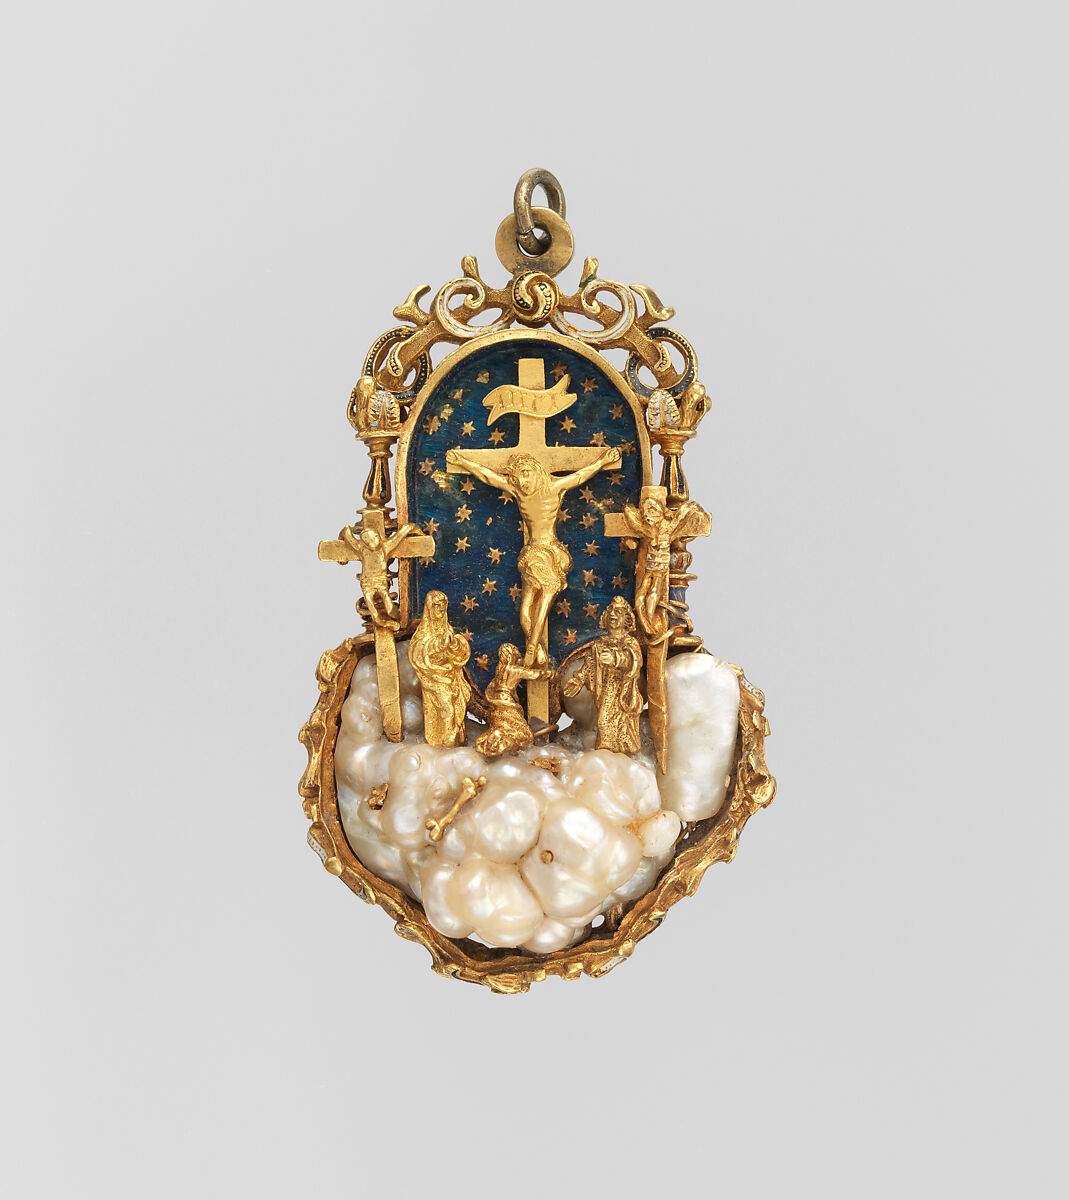 The Crucifixion, Gold, partly enameled, Baroque pearl, Northern European 